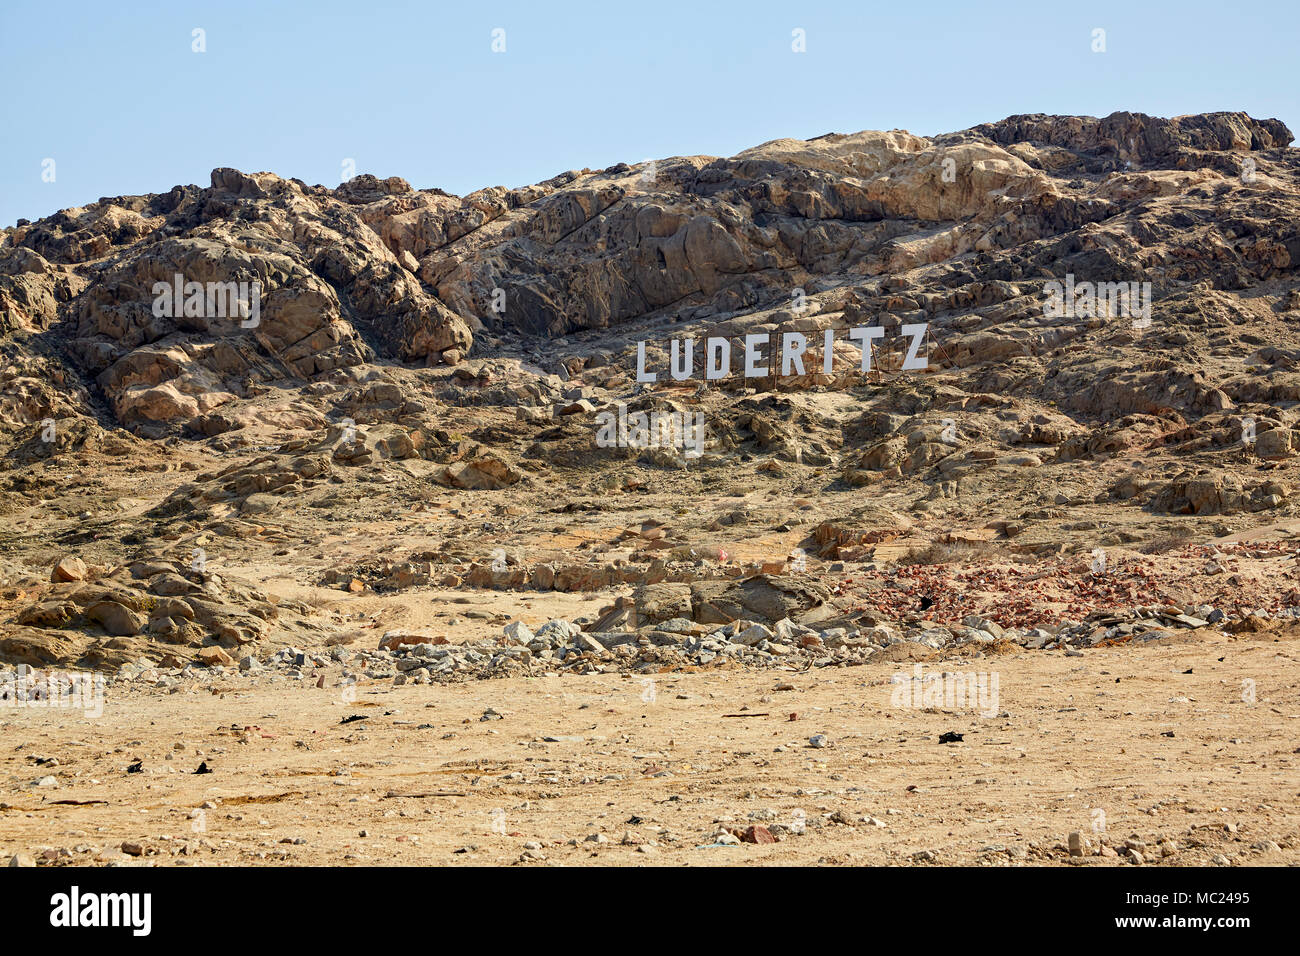 Luderitz sign on a mountain in Luderitz, Namibia, Africa Stock Photo